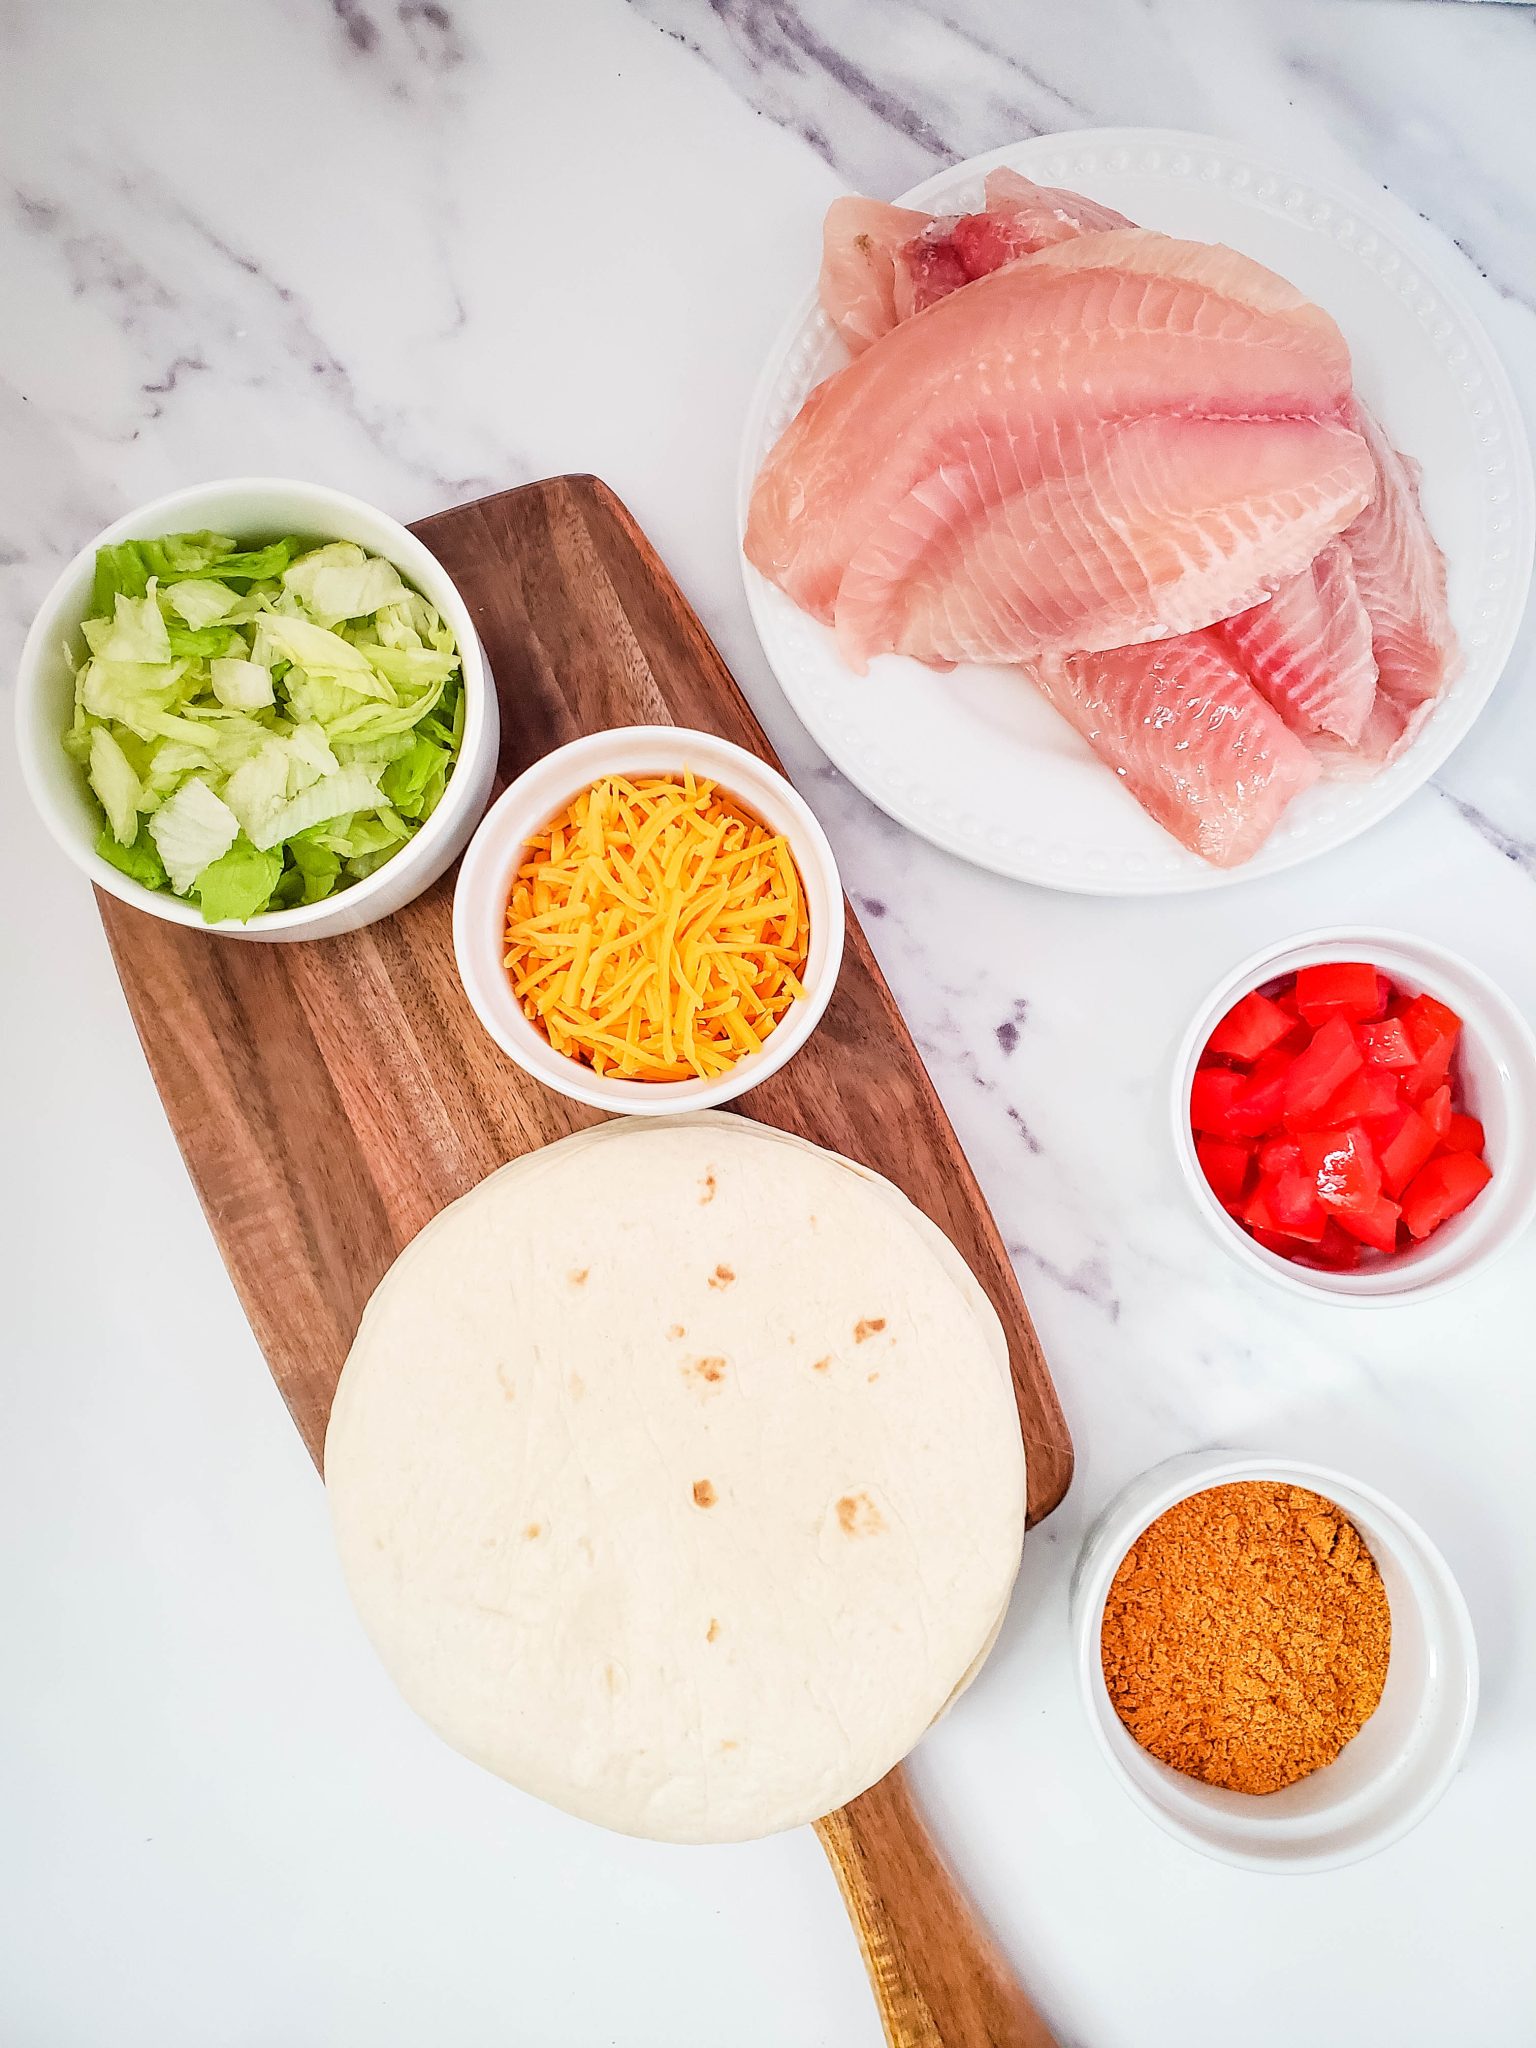 Step-by-step instructions to make fish tacos